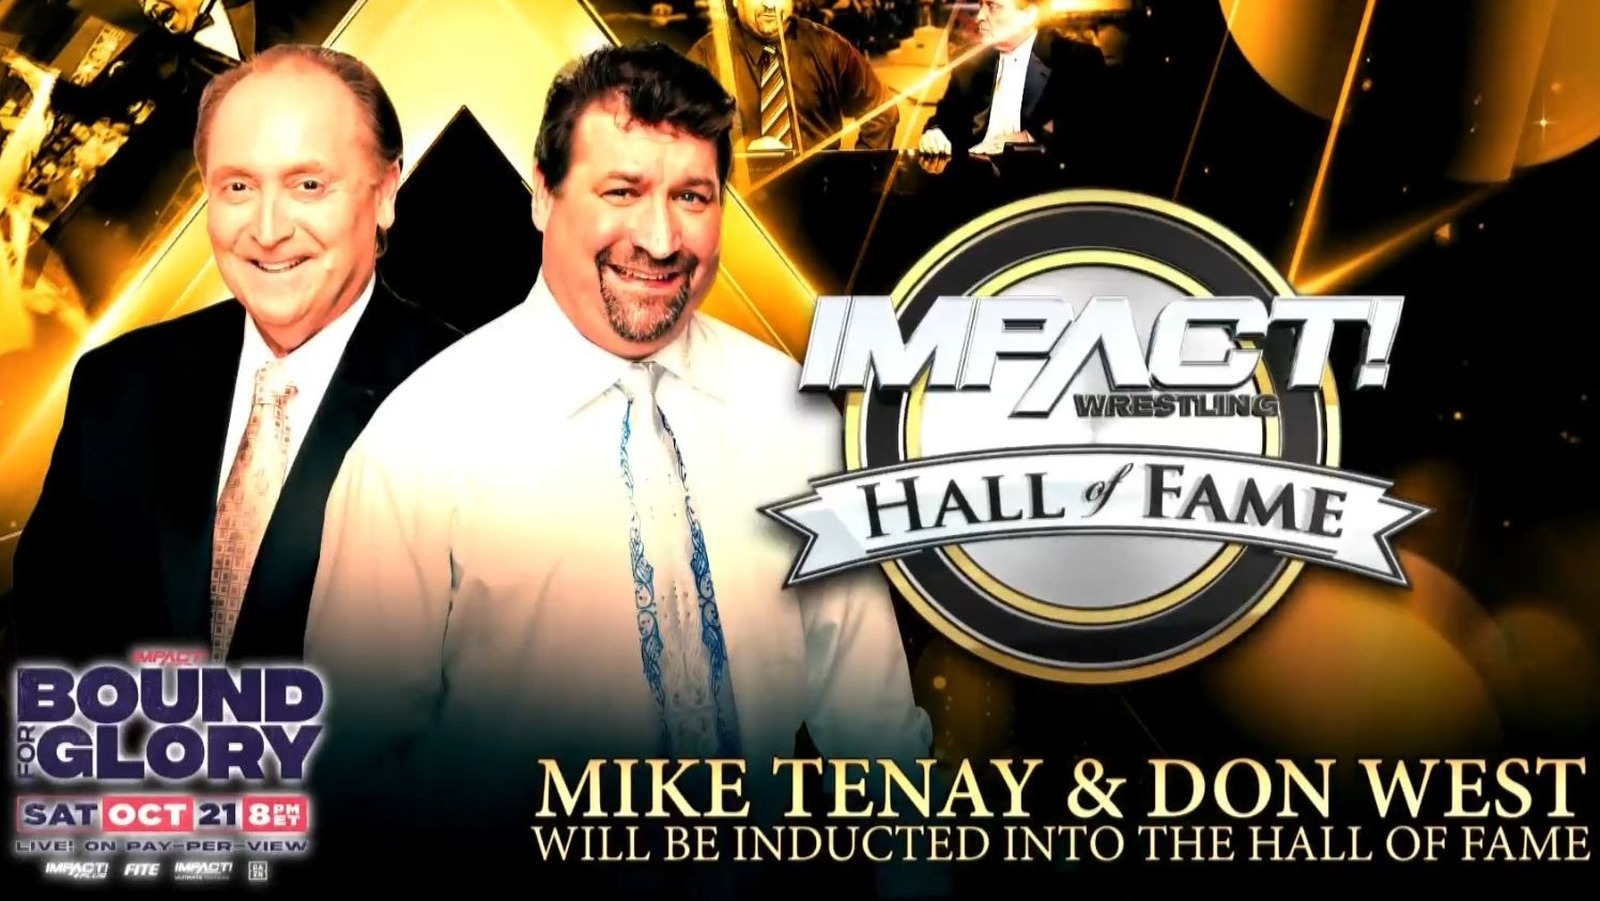 Don West & Mike Tenay Announced For Impact Hall Of Fame